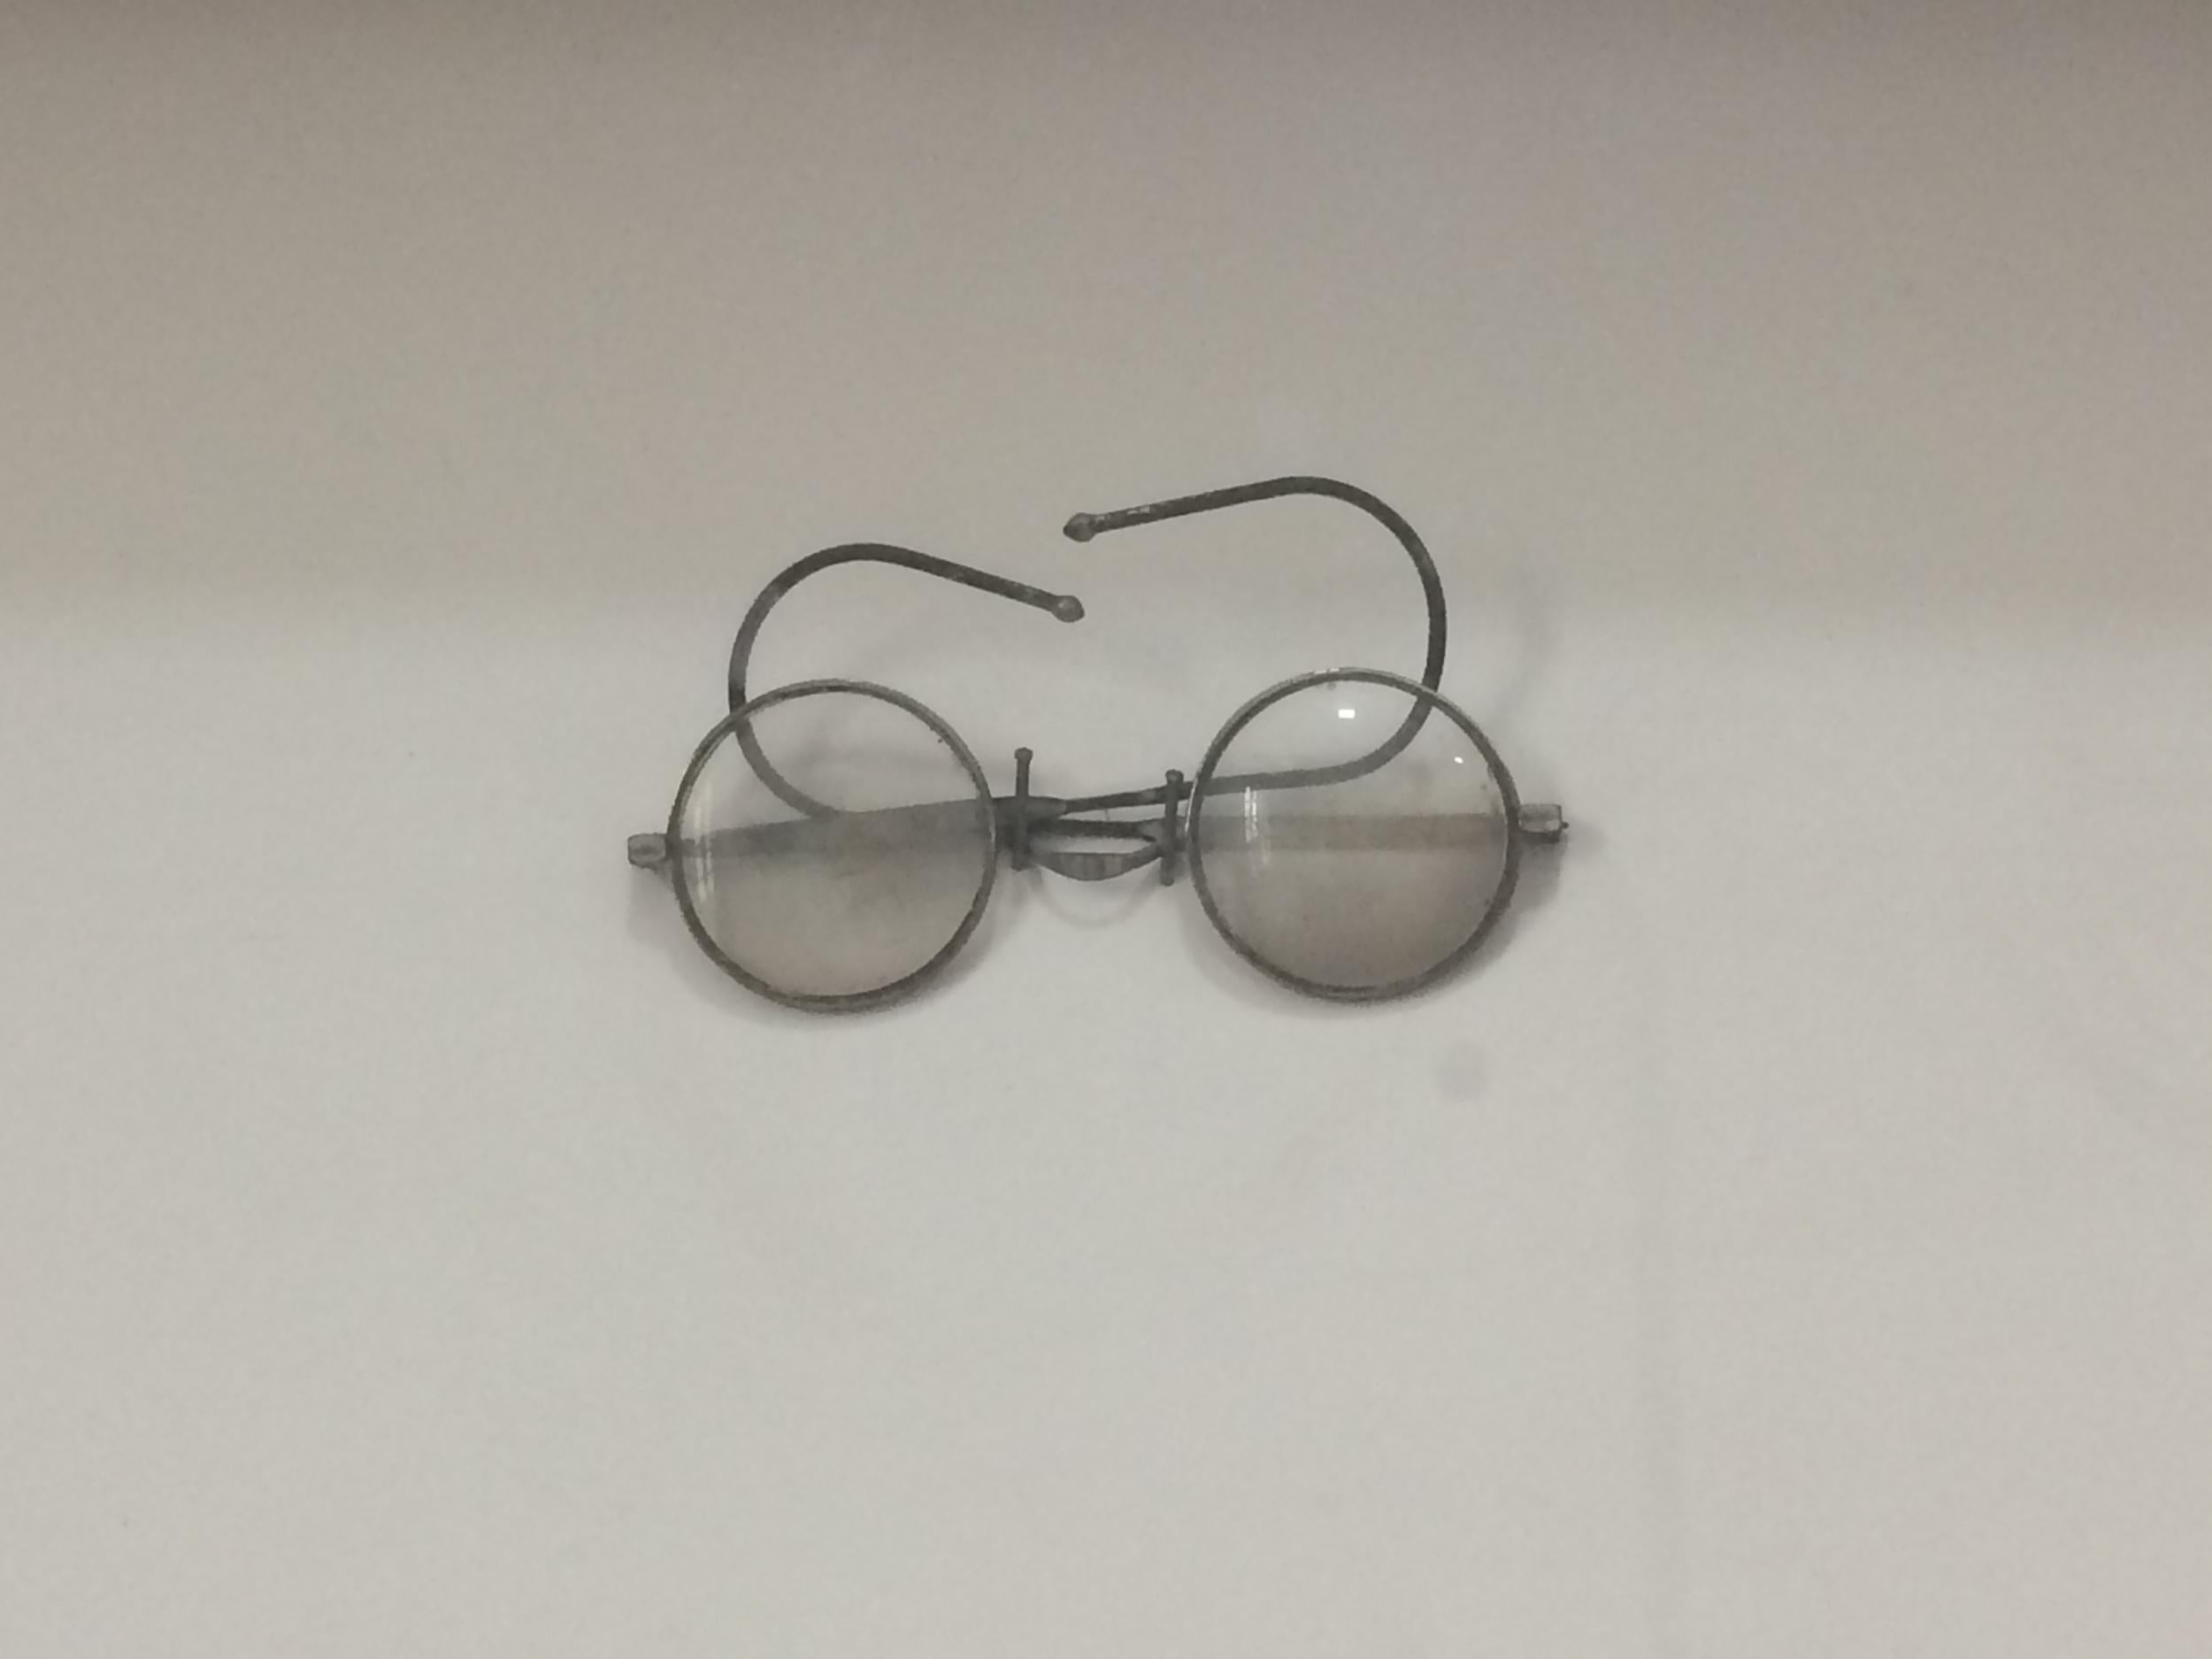 Gandhi’s spectacles, walking aids and pocket watch are all available to view